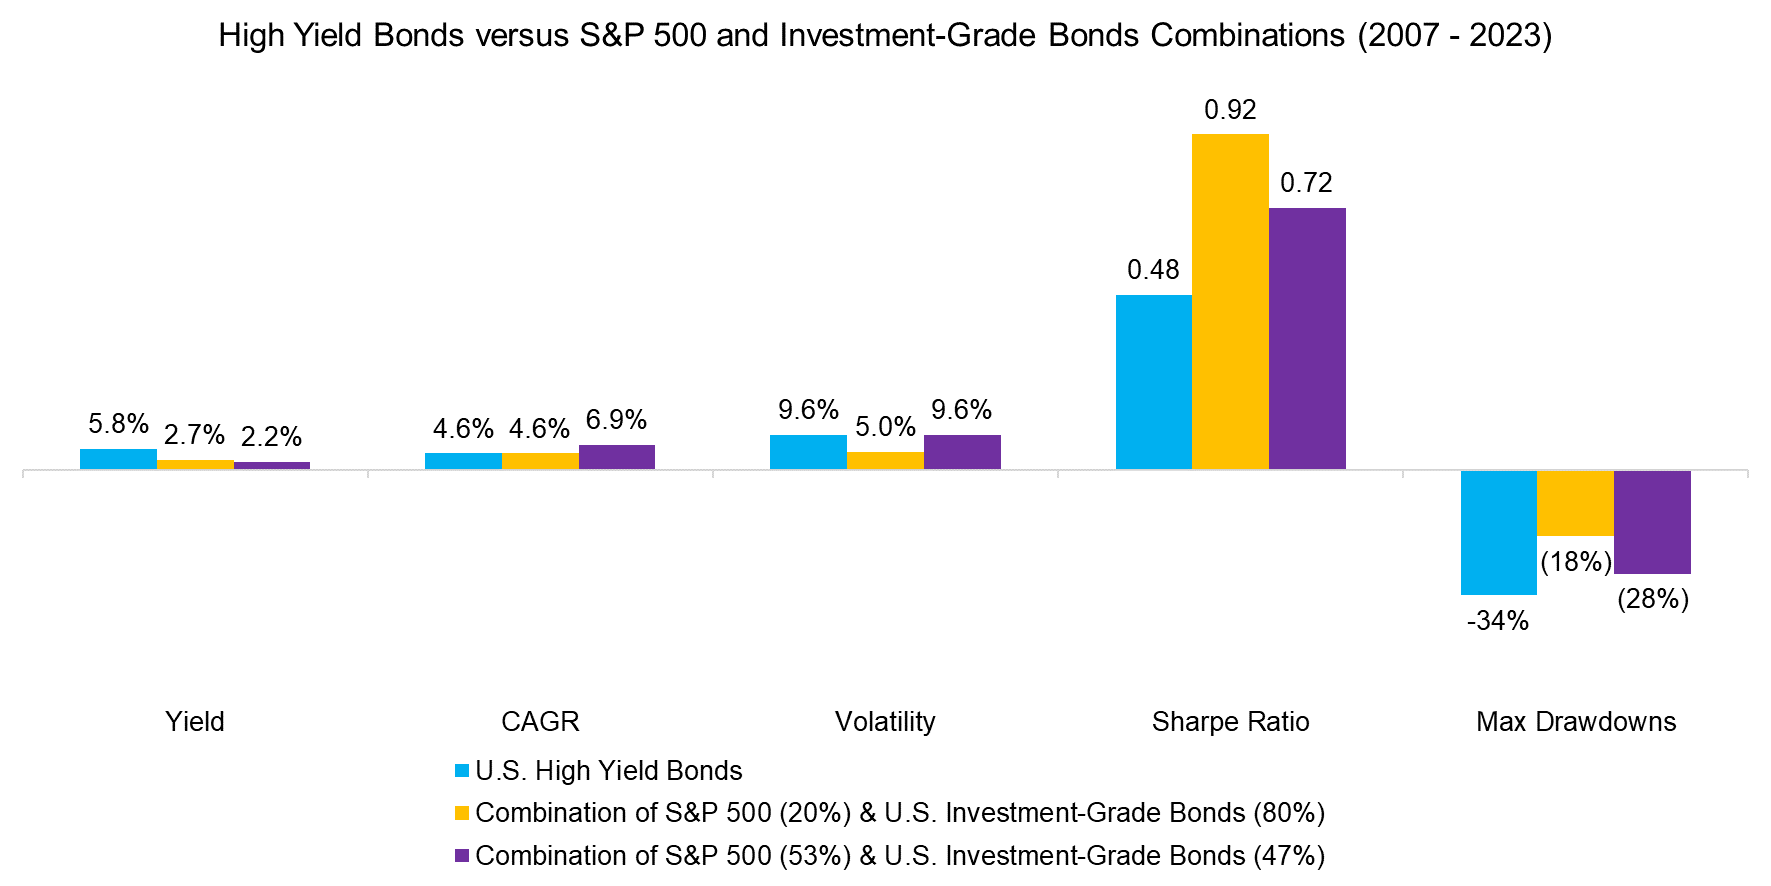 High Yield Bonds versus S&P 500 and Investment-Grade Bonds Combinations (2007 - 2023)